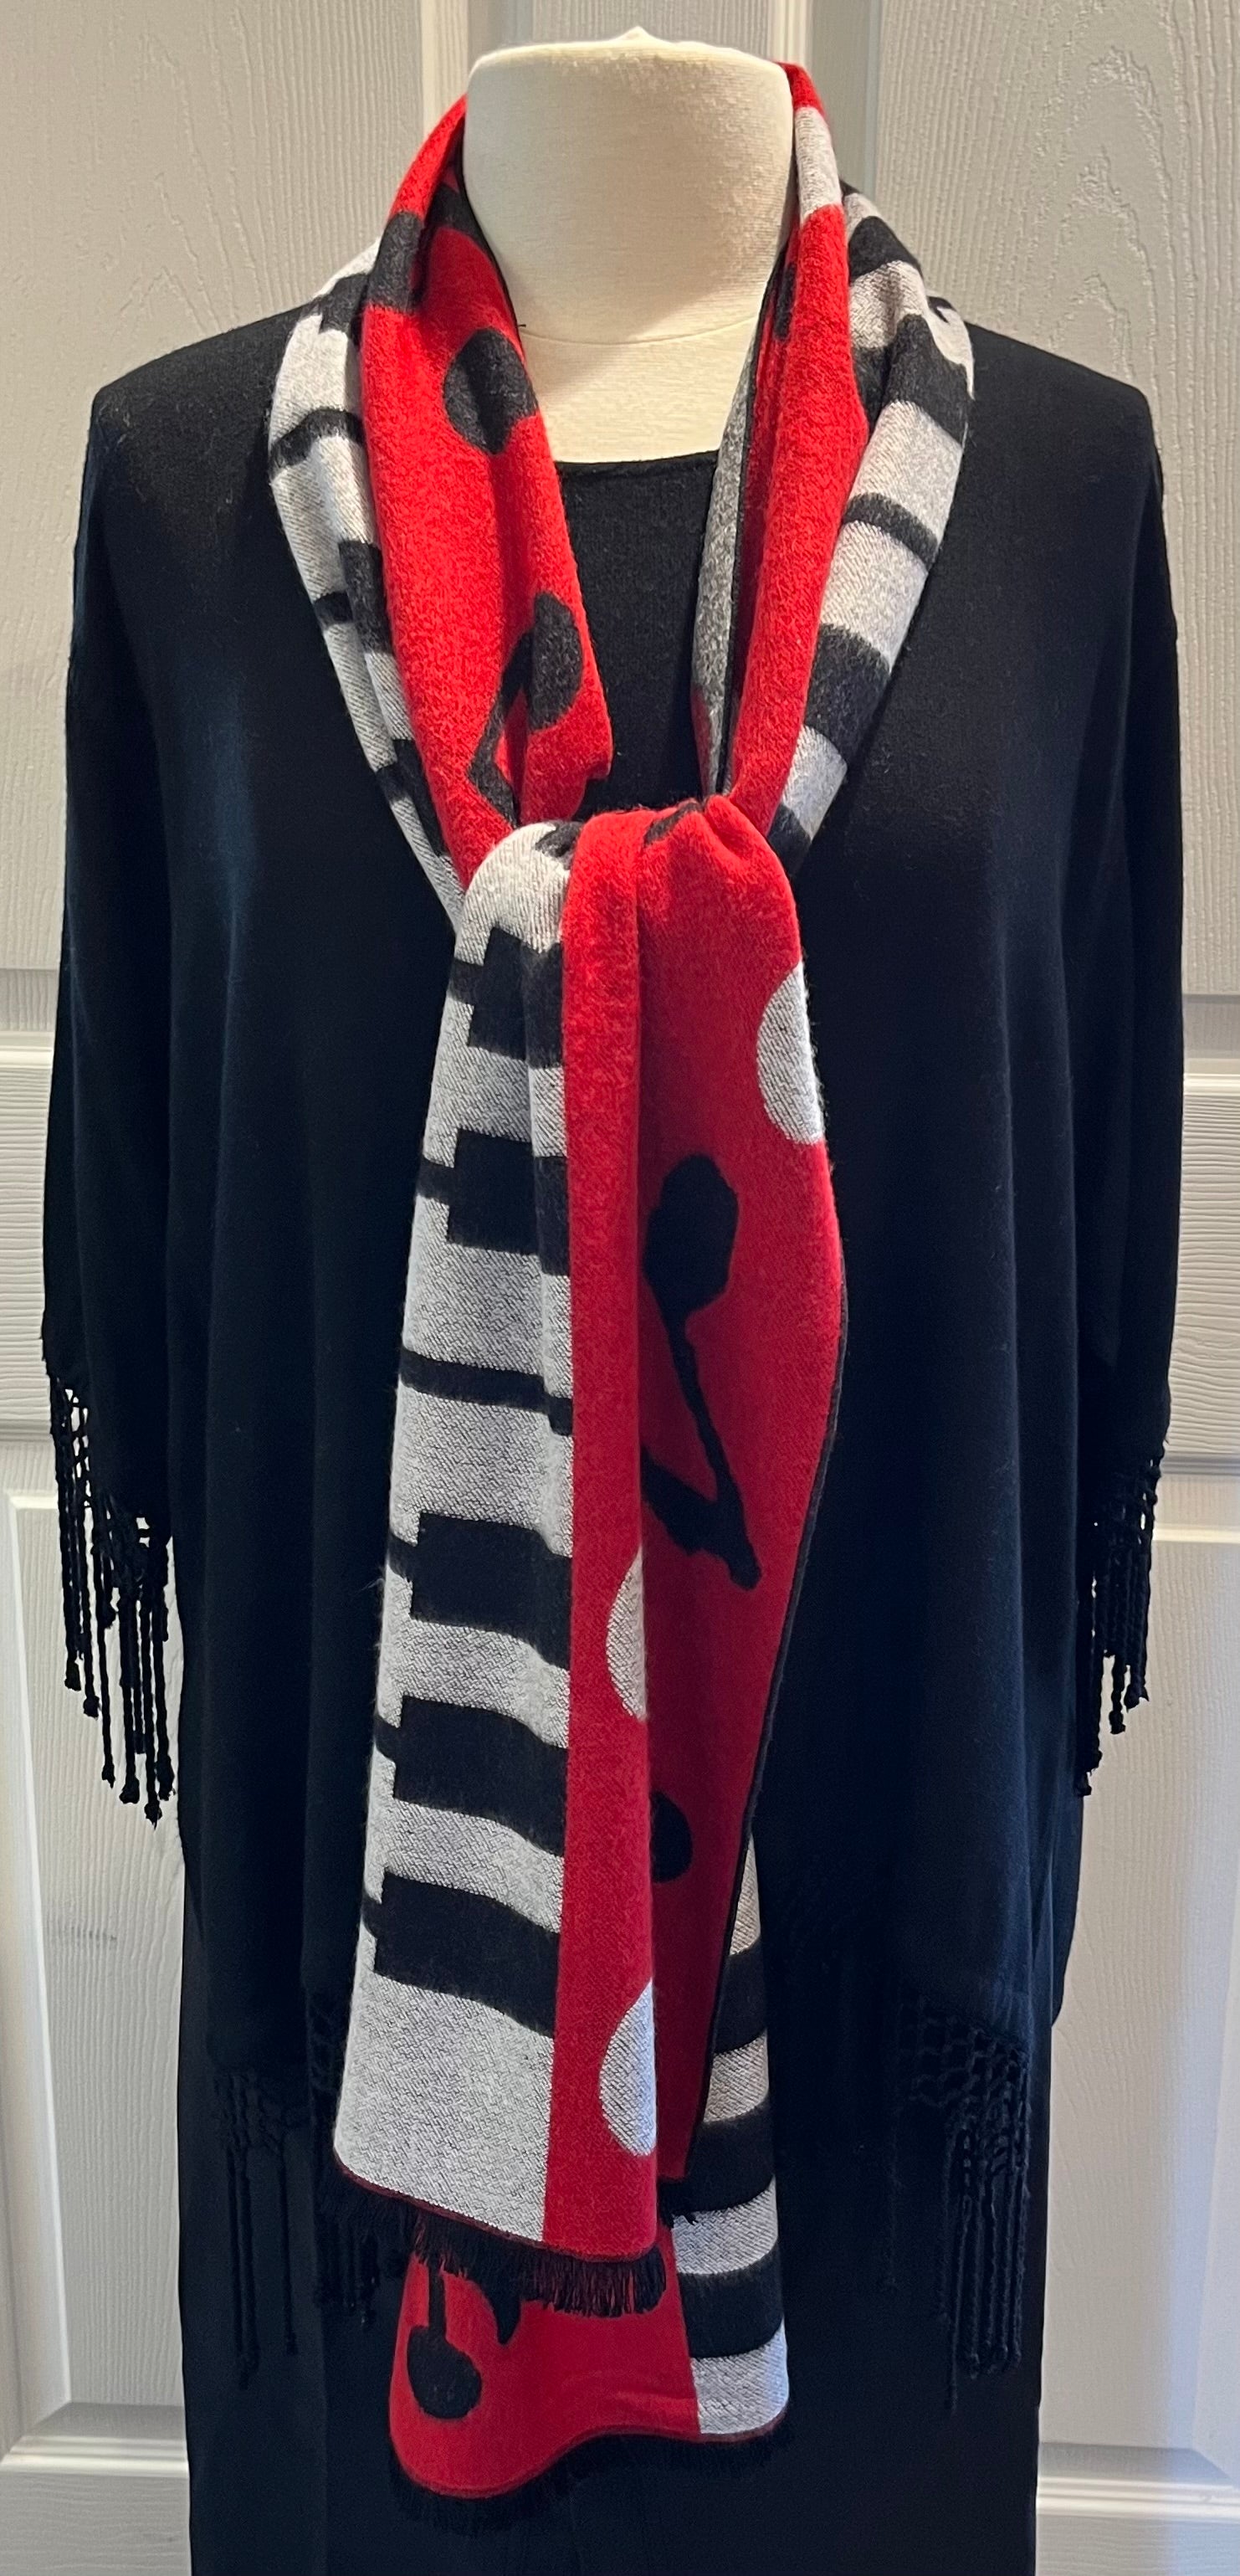 Piano/Musical Notes Cashmere Scarf